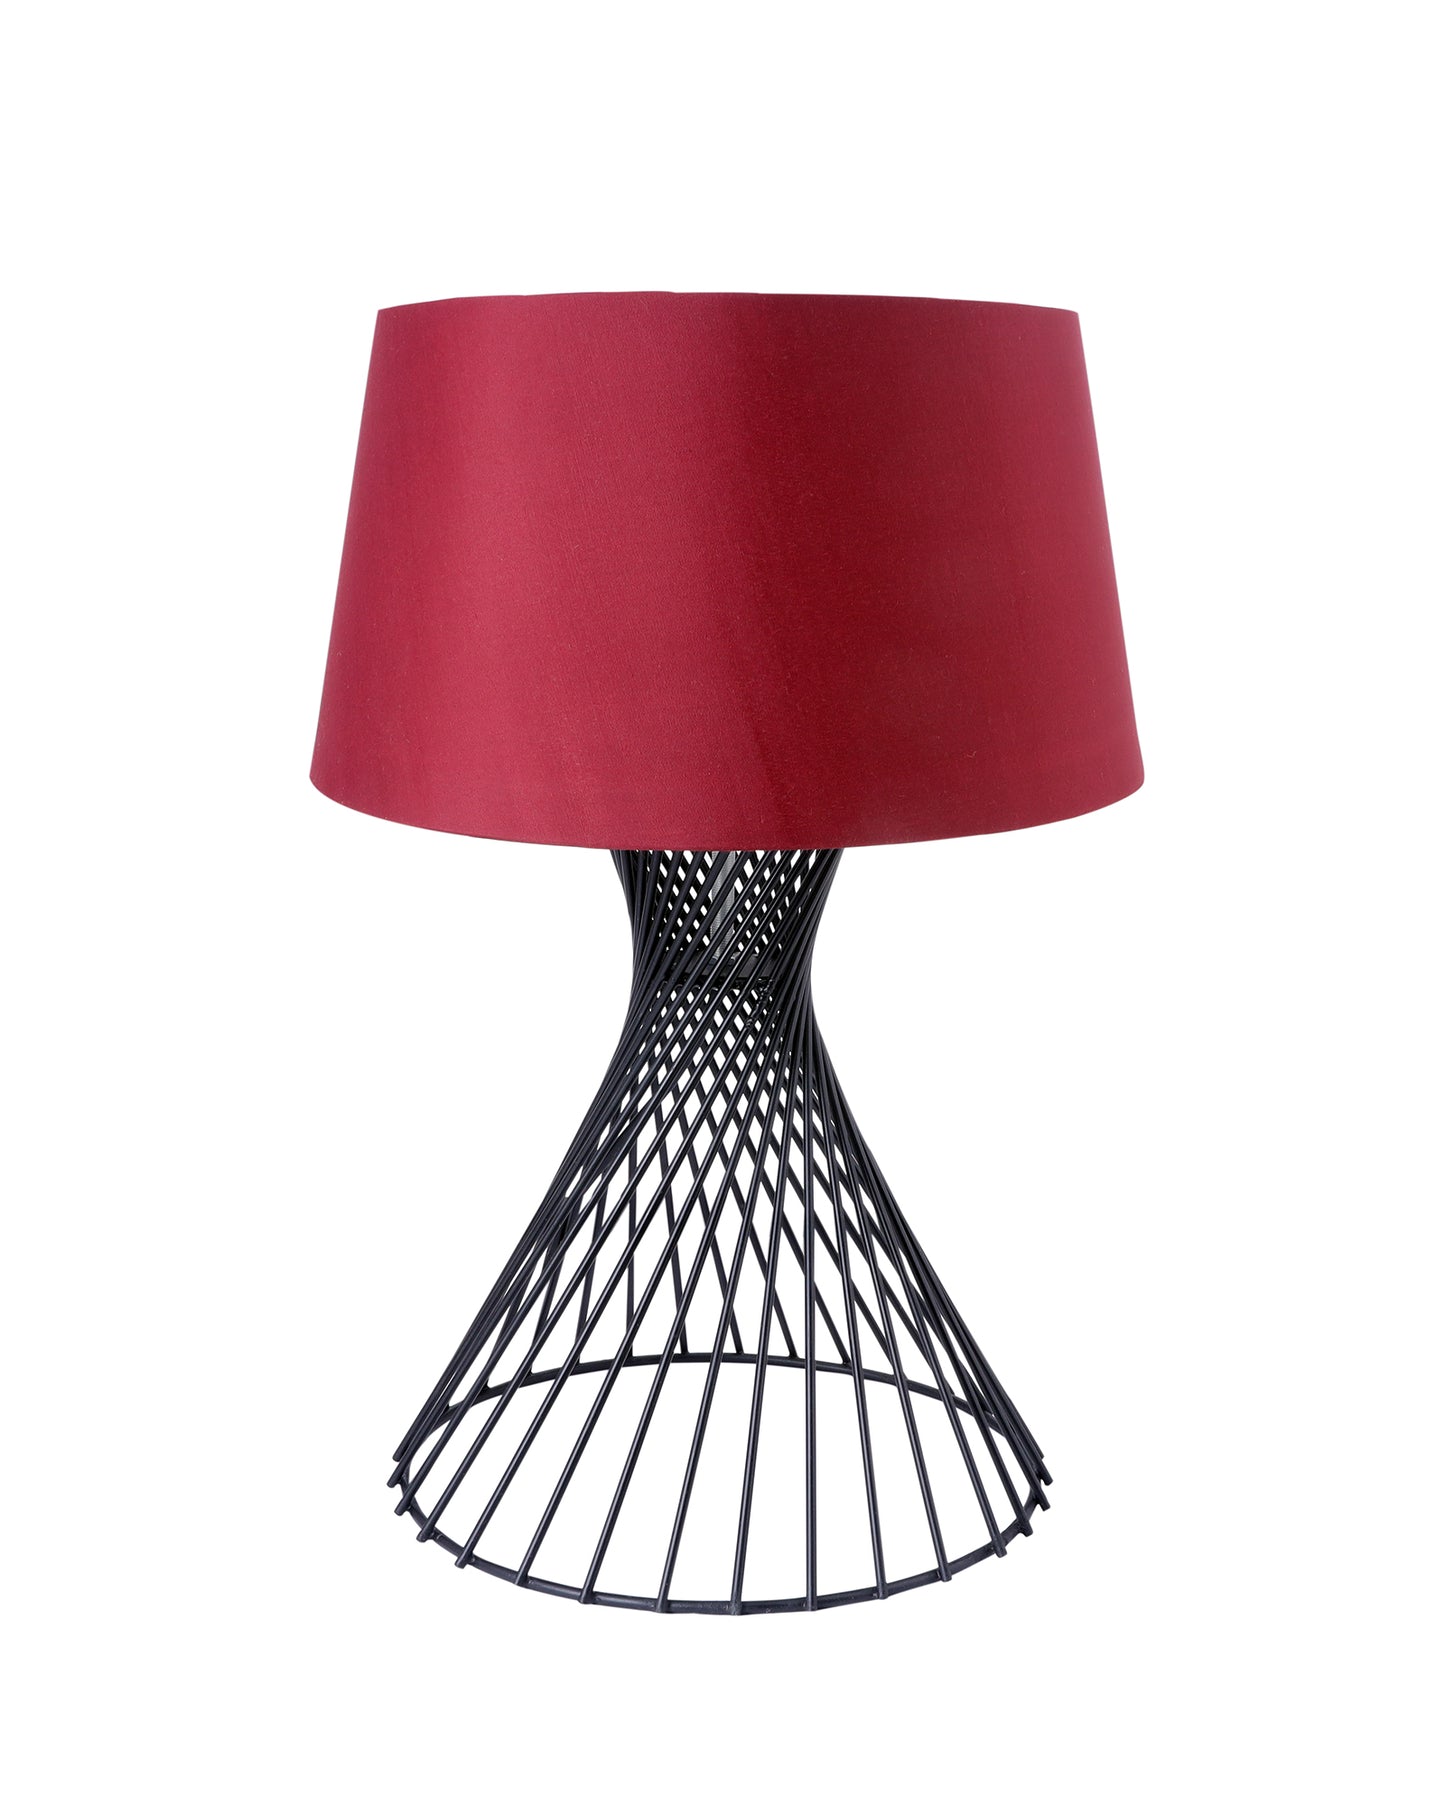 Modern Table Lamps, Spiral Metal Wire Black Base with Fabric Lampshade for Home Office Cafe Restaurant